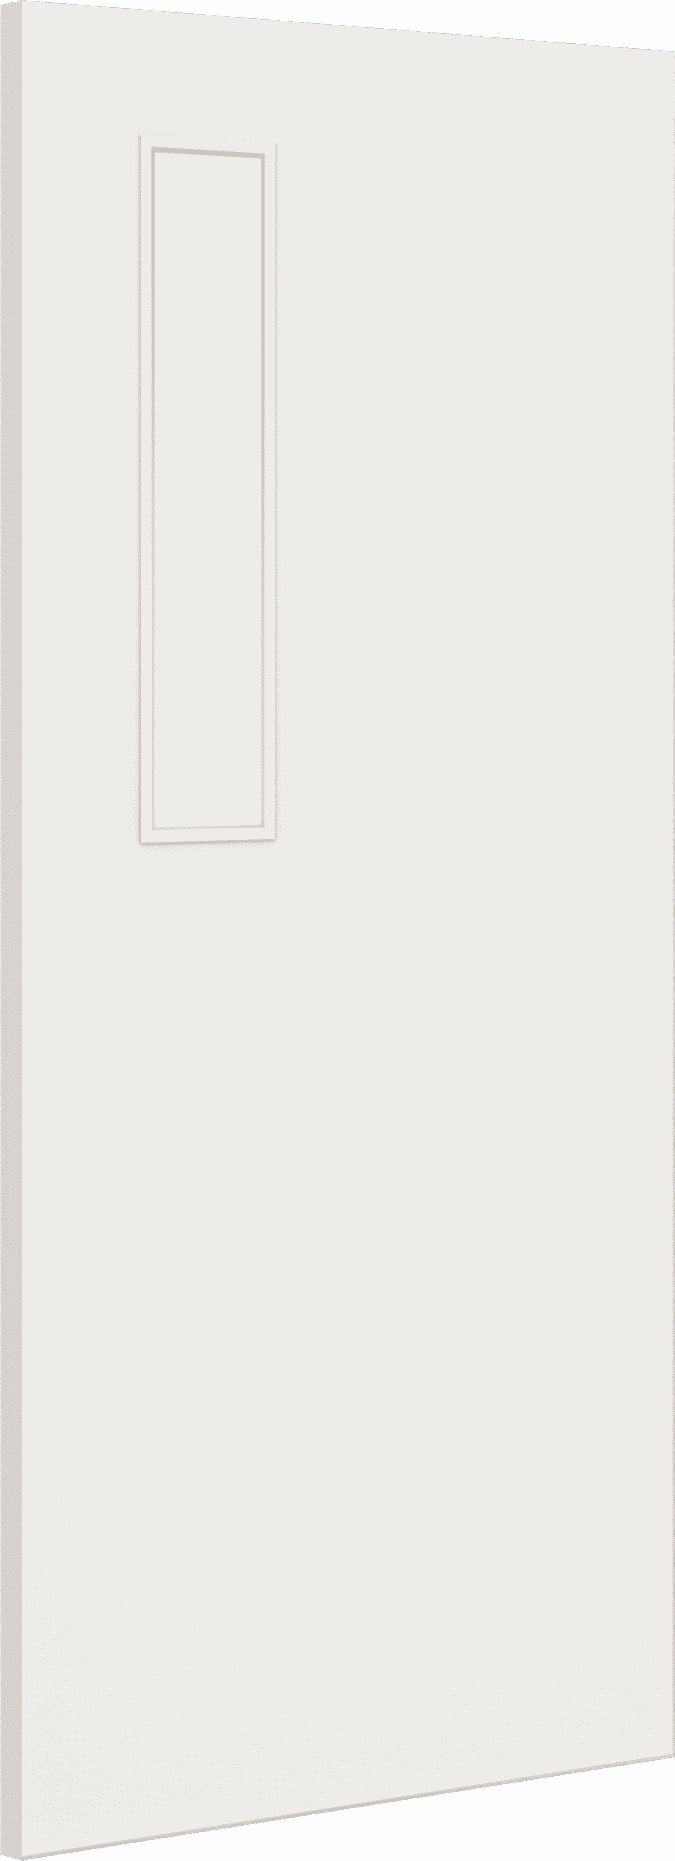 1981mm x 686mm x 44mm (27") Architectural Paint Grade White 08 Frosted Glazed Fire Door Blank